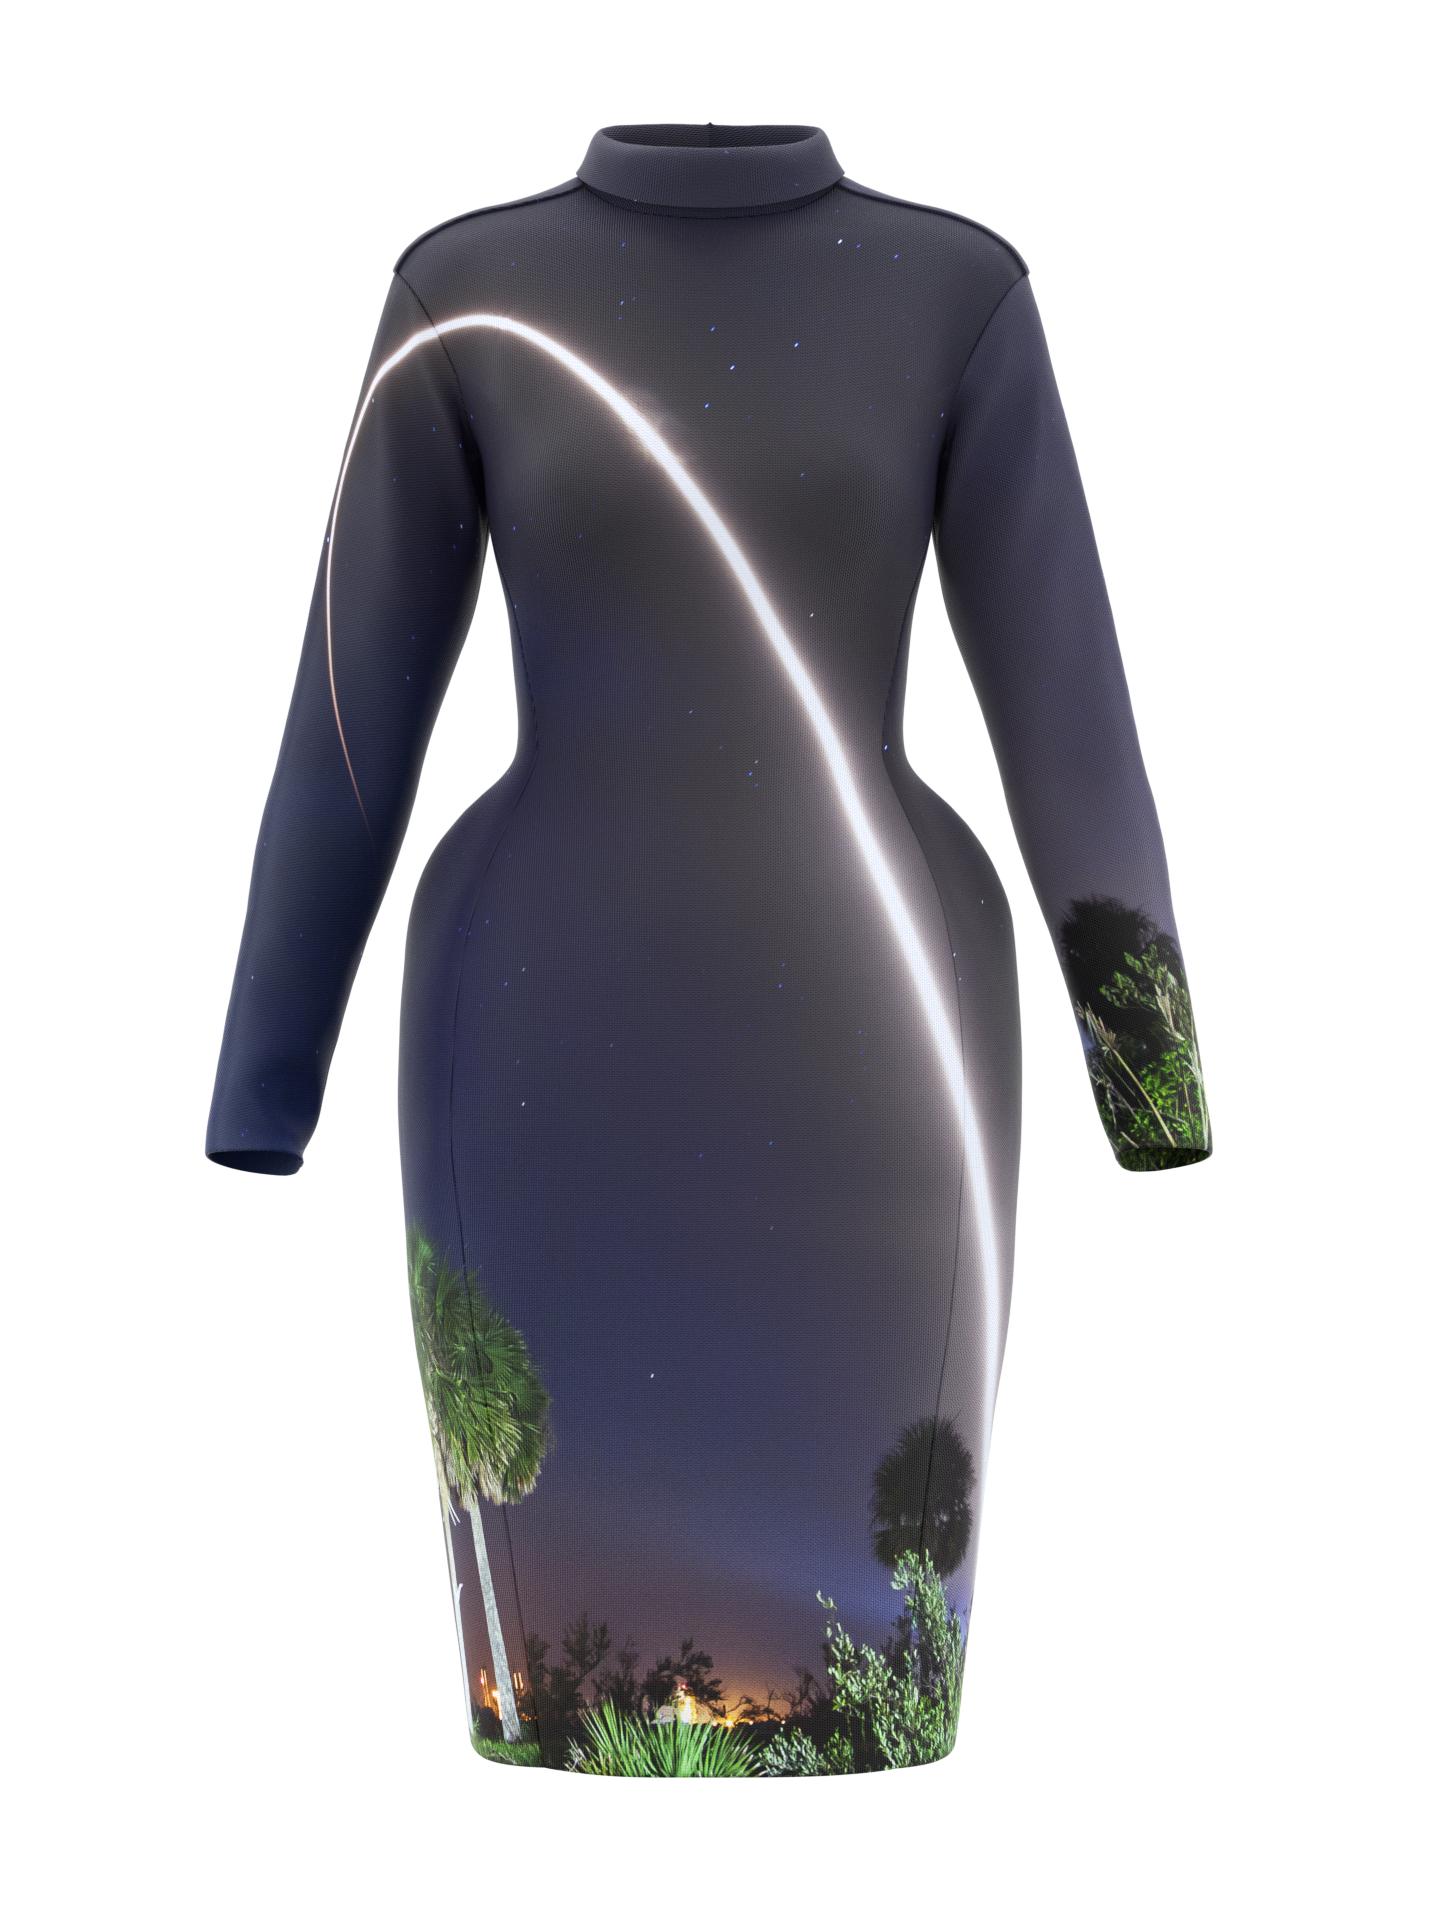 Space Dress - Men occupy very little space on Earth by DRESSX COSMIC - INSPIRED BY SPACEX